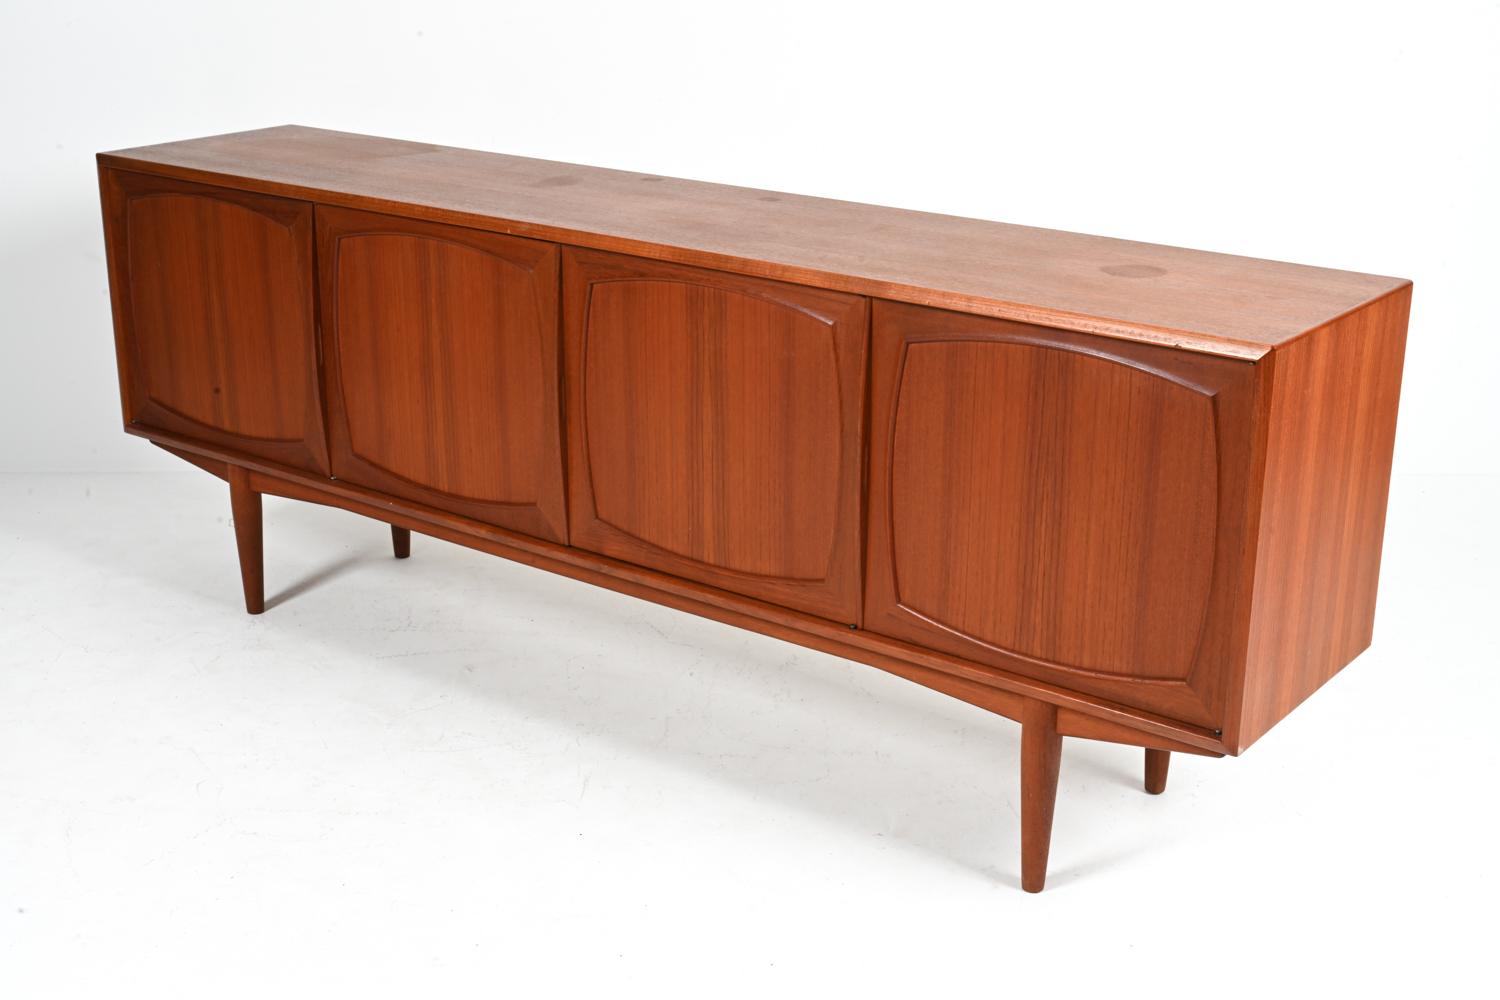 Dive deep into the golden era of Scandinavian design with this breathtaking Teak Mid-Century Sideboard, a harmonious creation by the legendary duo, Rolf Rastad and Adolf Relling. Hailing from the heart of Norway in the 1960s, this piece perfectly